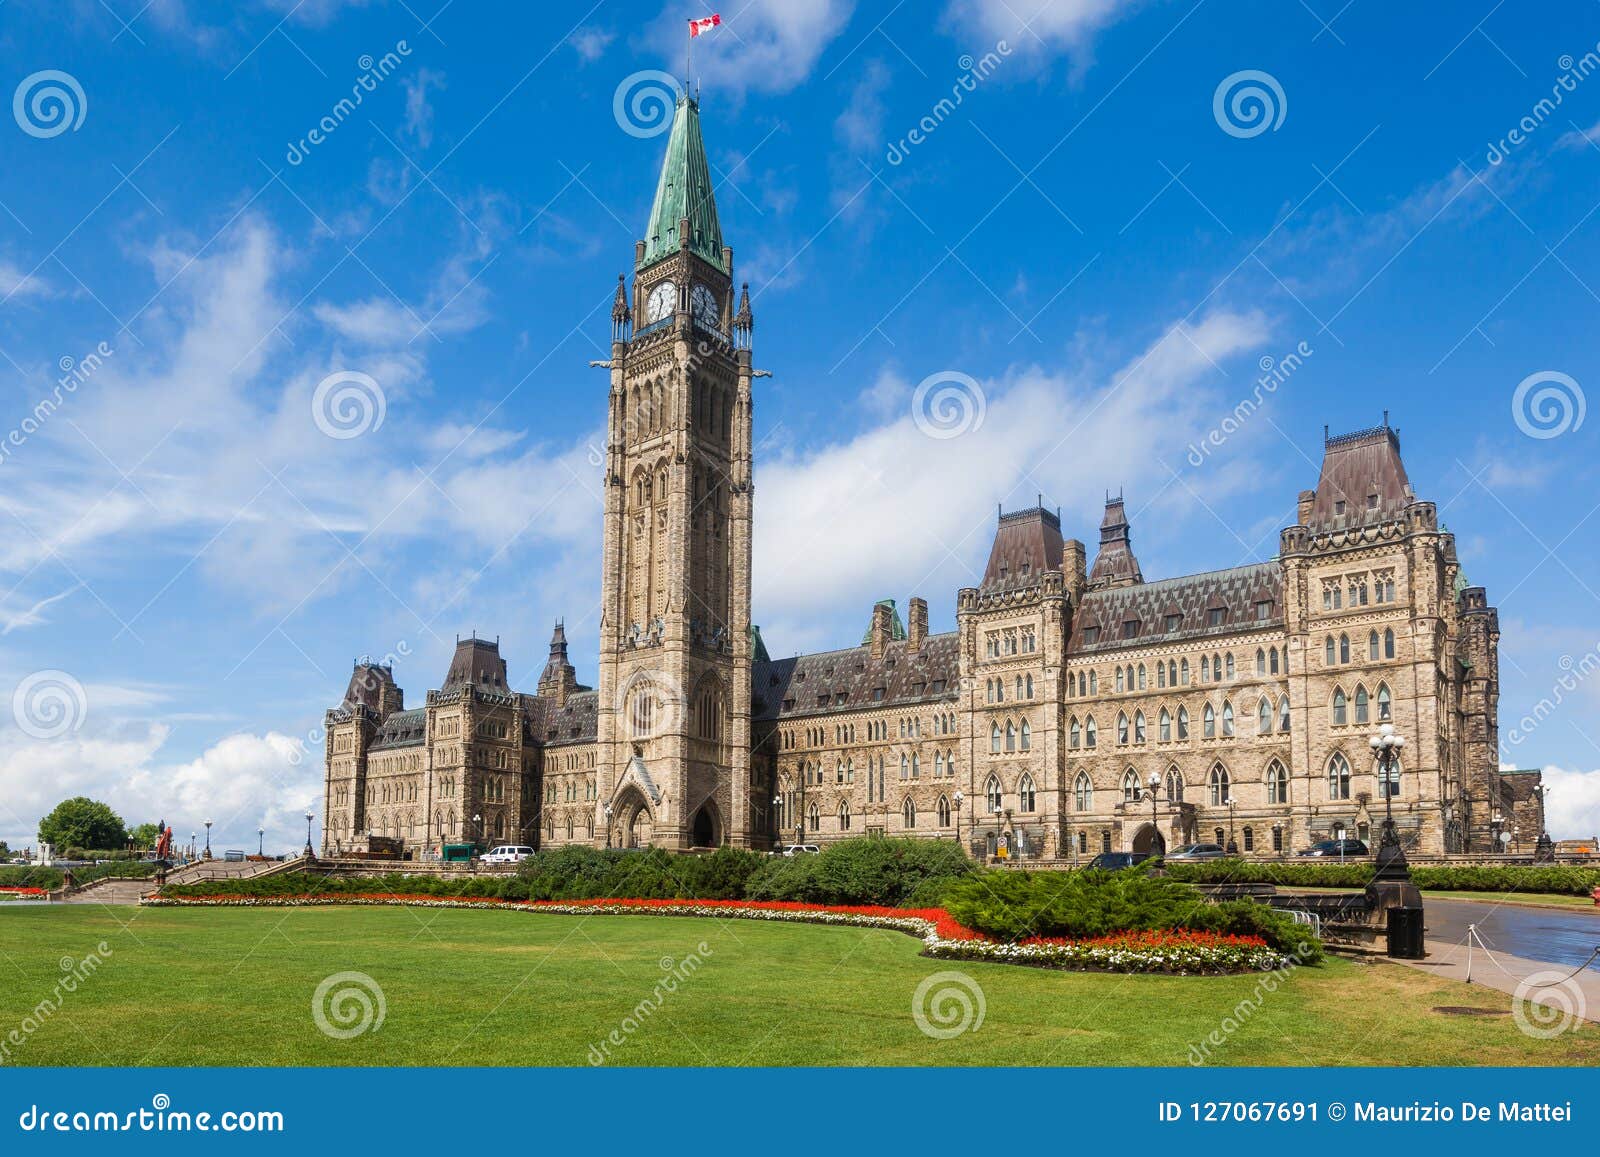 center block and peace tower on parliament hill ottawa